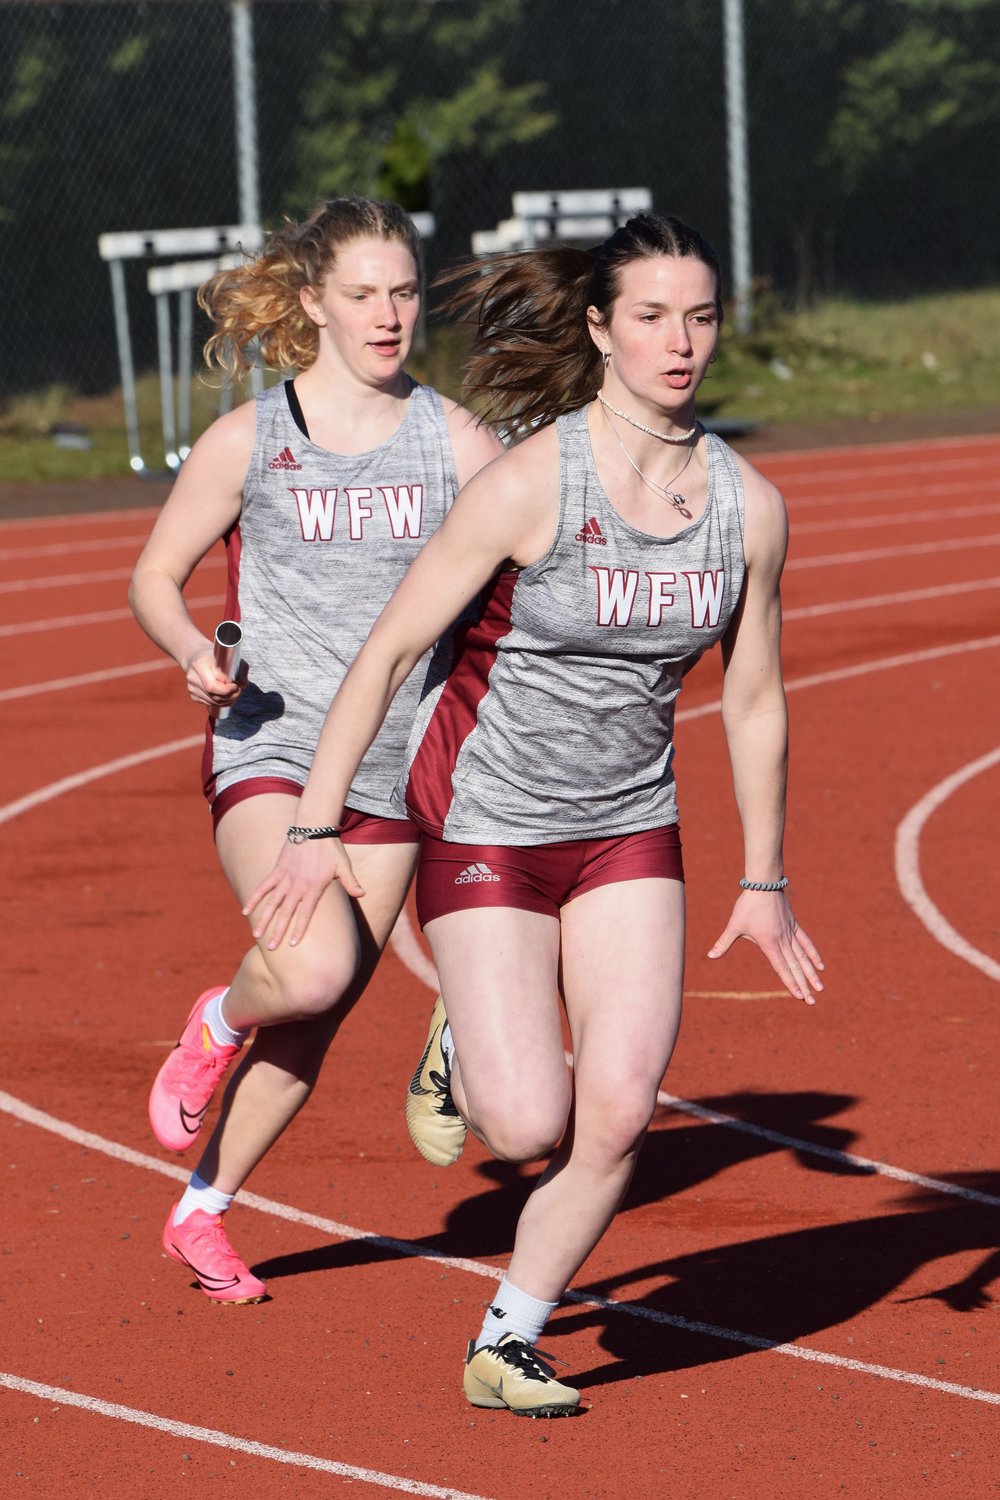 Emily Mallonee hands the baton off to Amanda Bennett during a relay at W.F. West's dual meet at Tumwater on March 21.